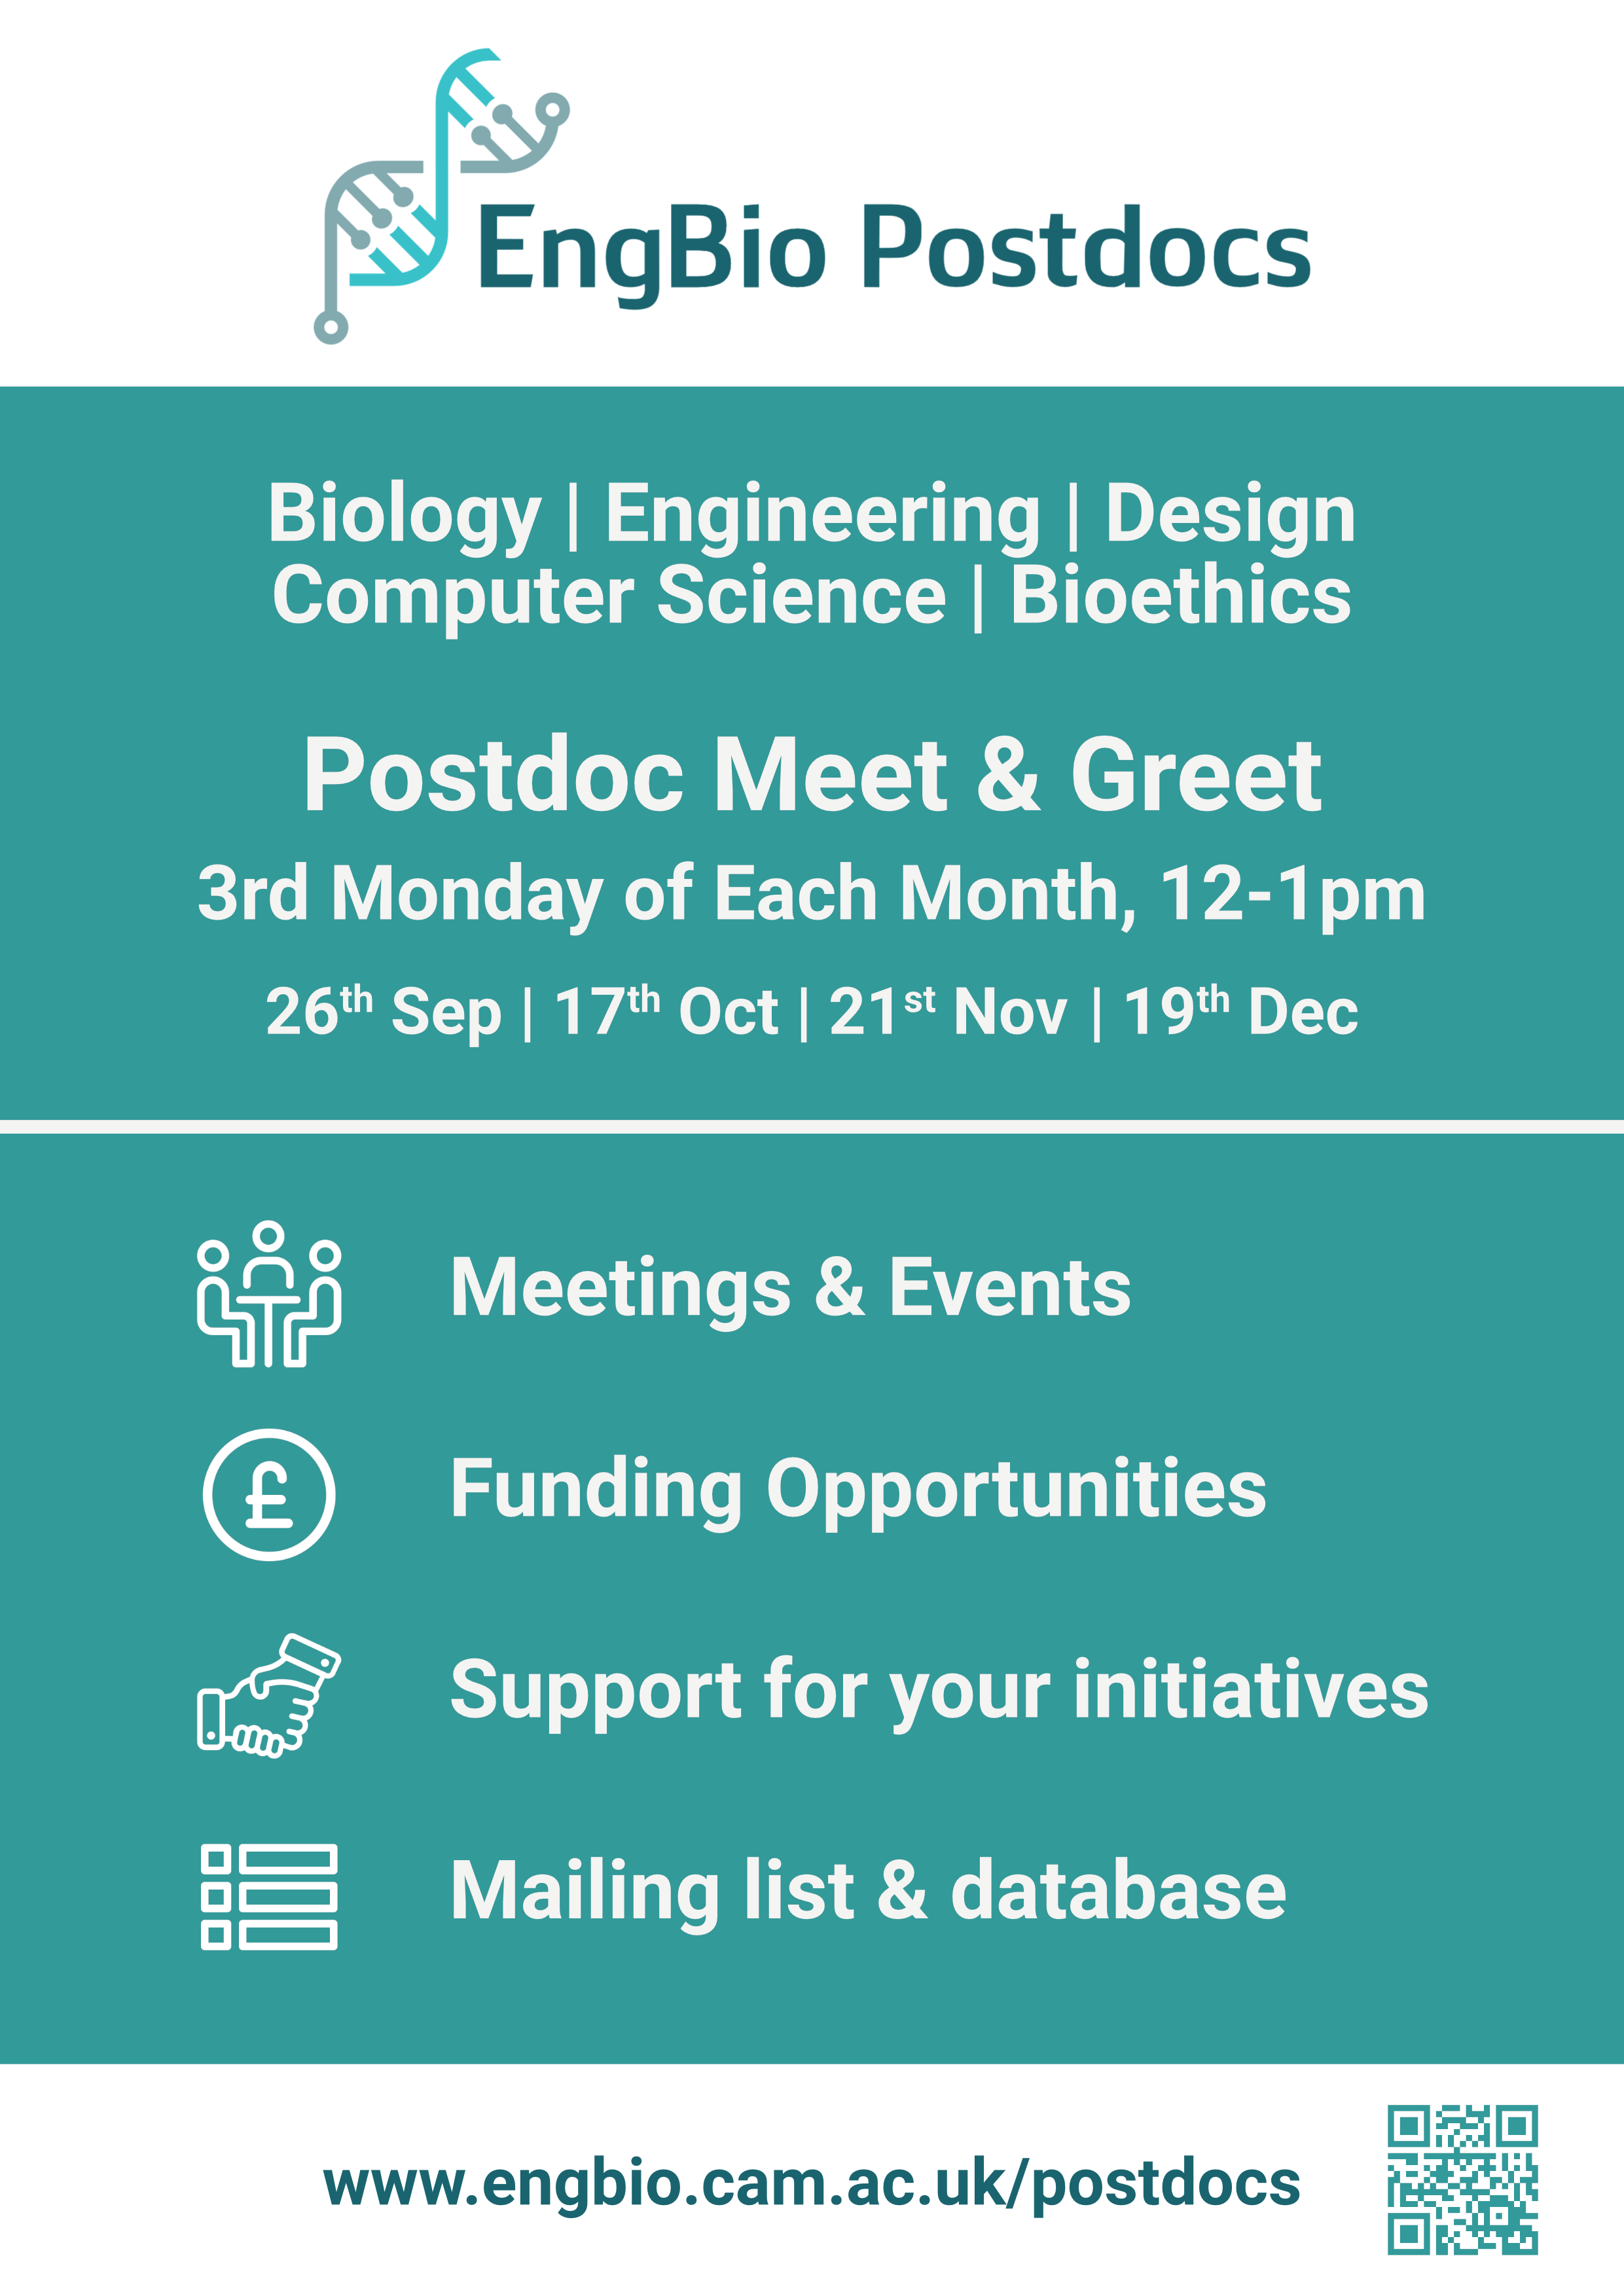 EngBio Postdocs Meet and Greet - 3rd Monday of each month - 12-1pm - Register Now